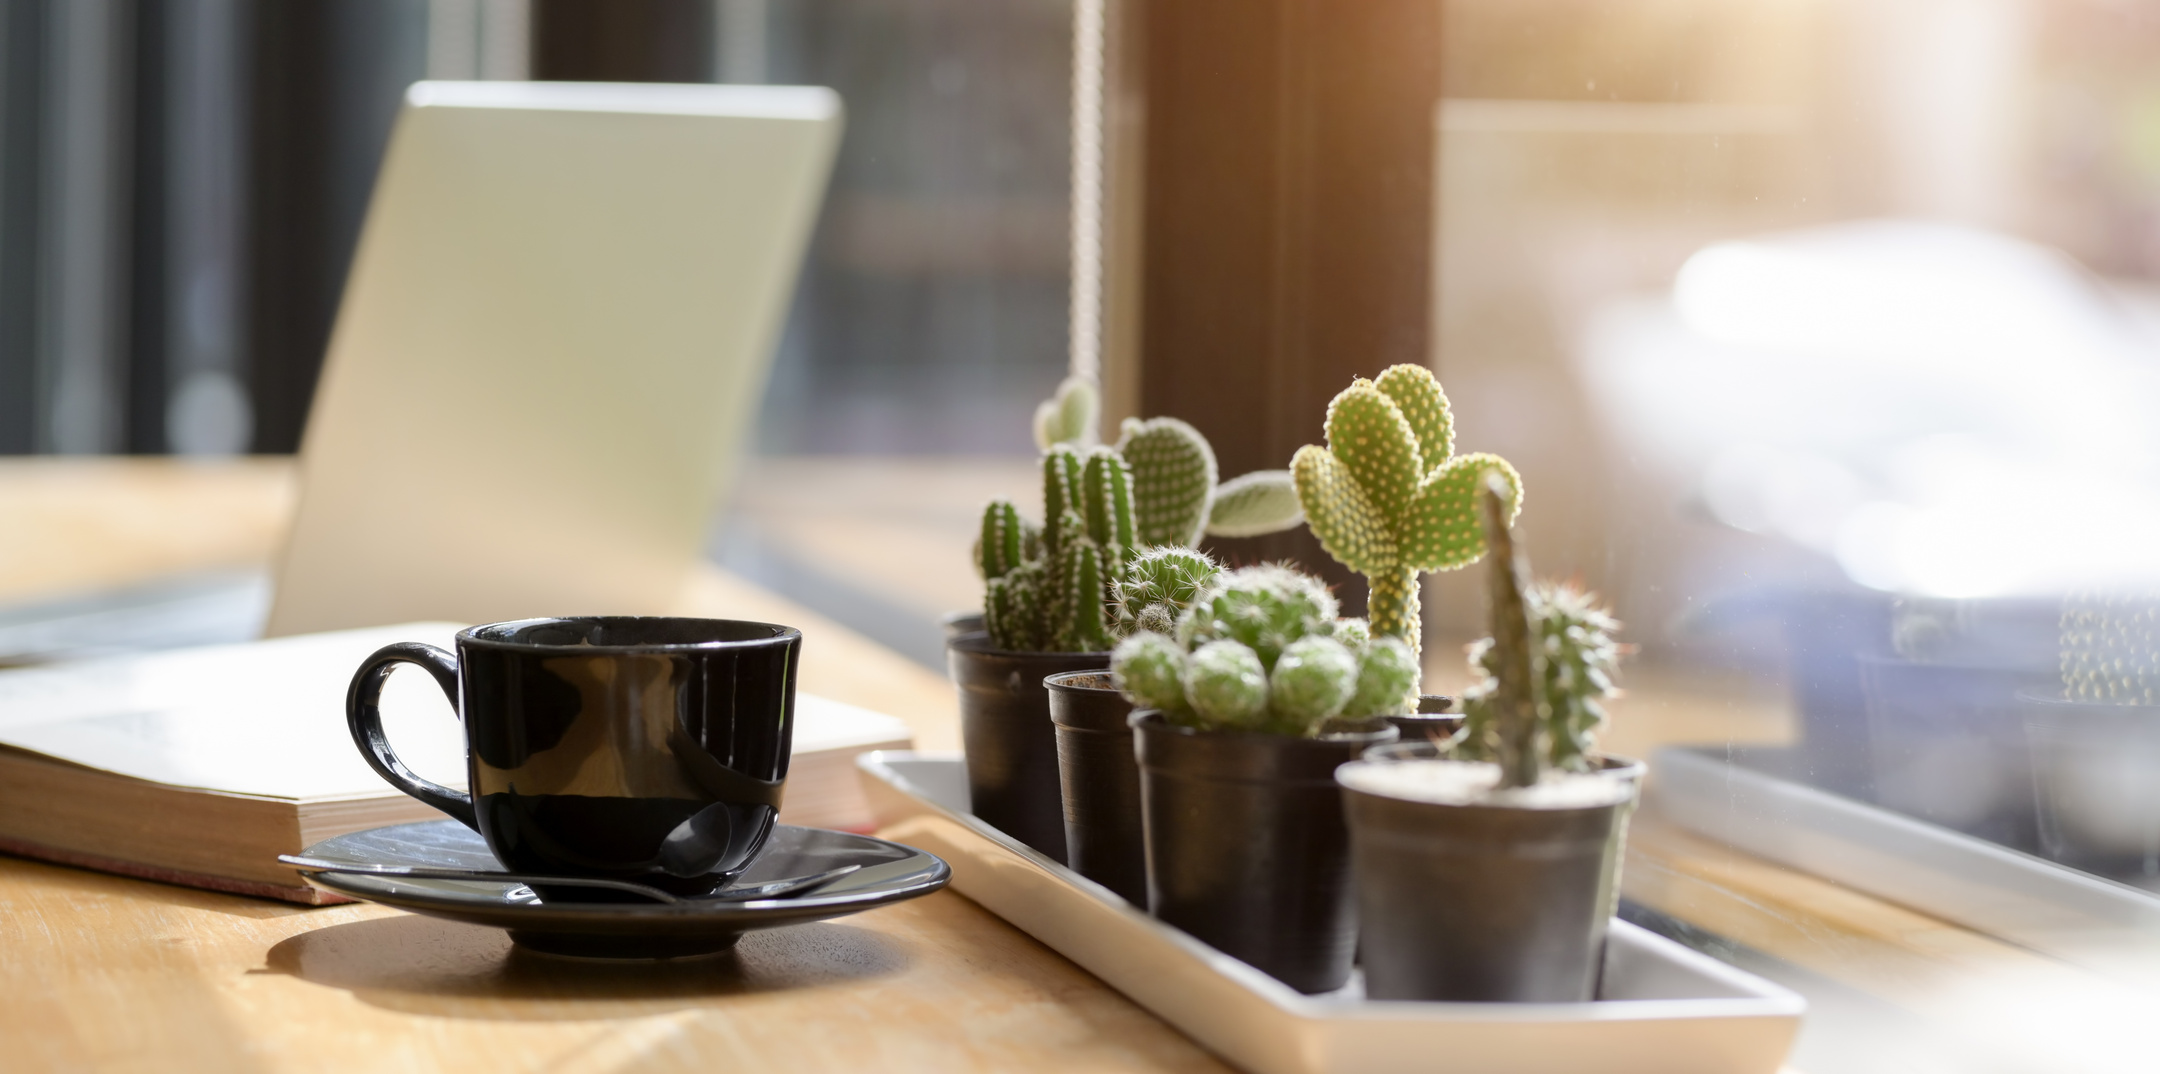 Cozy desk with potted cactuses and laptop